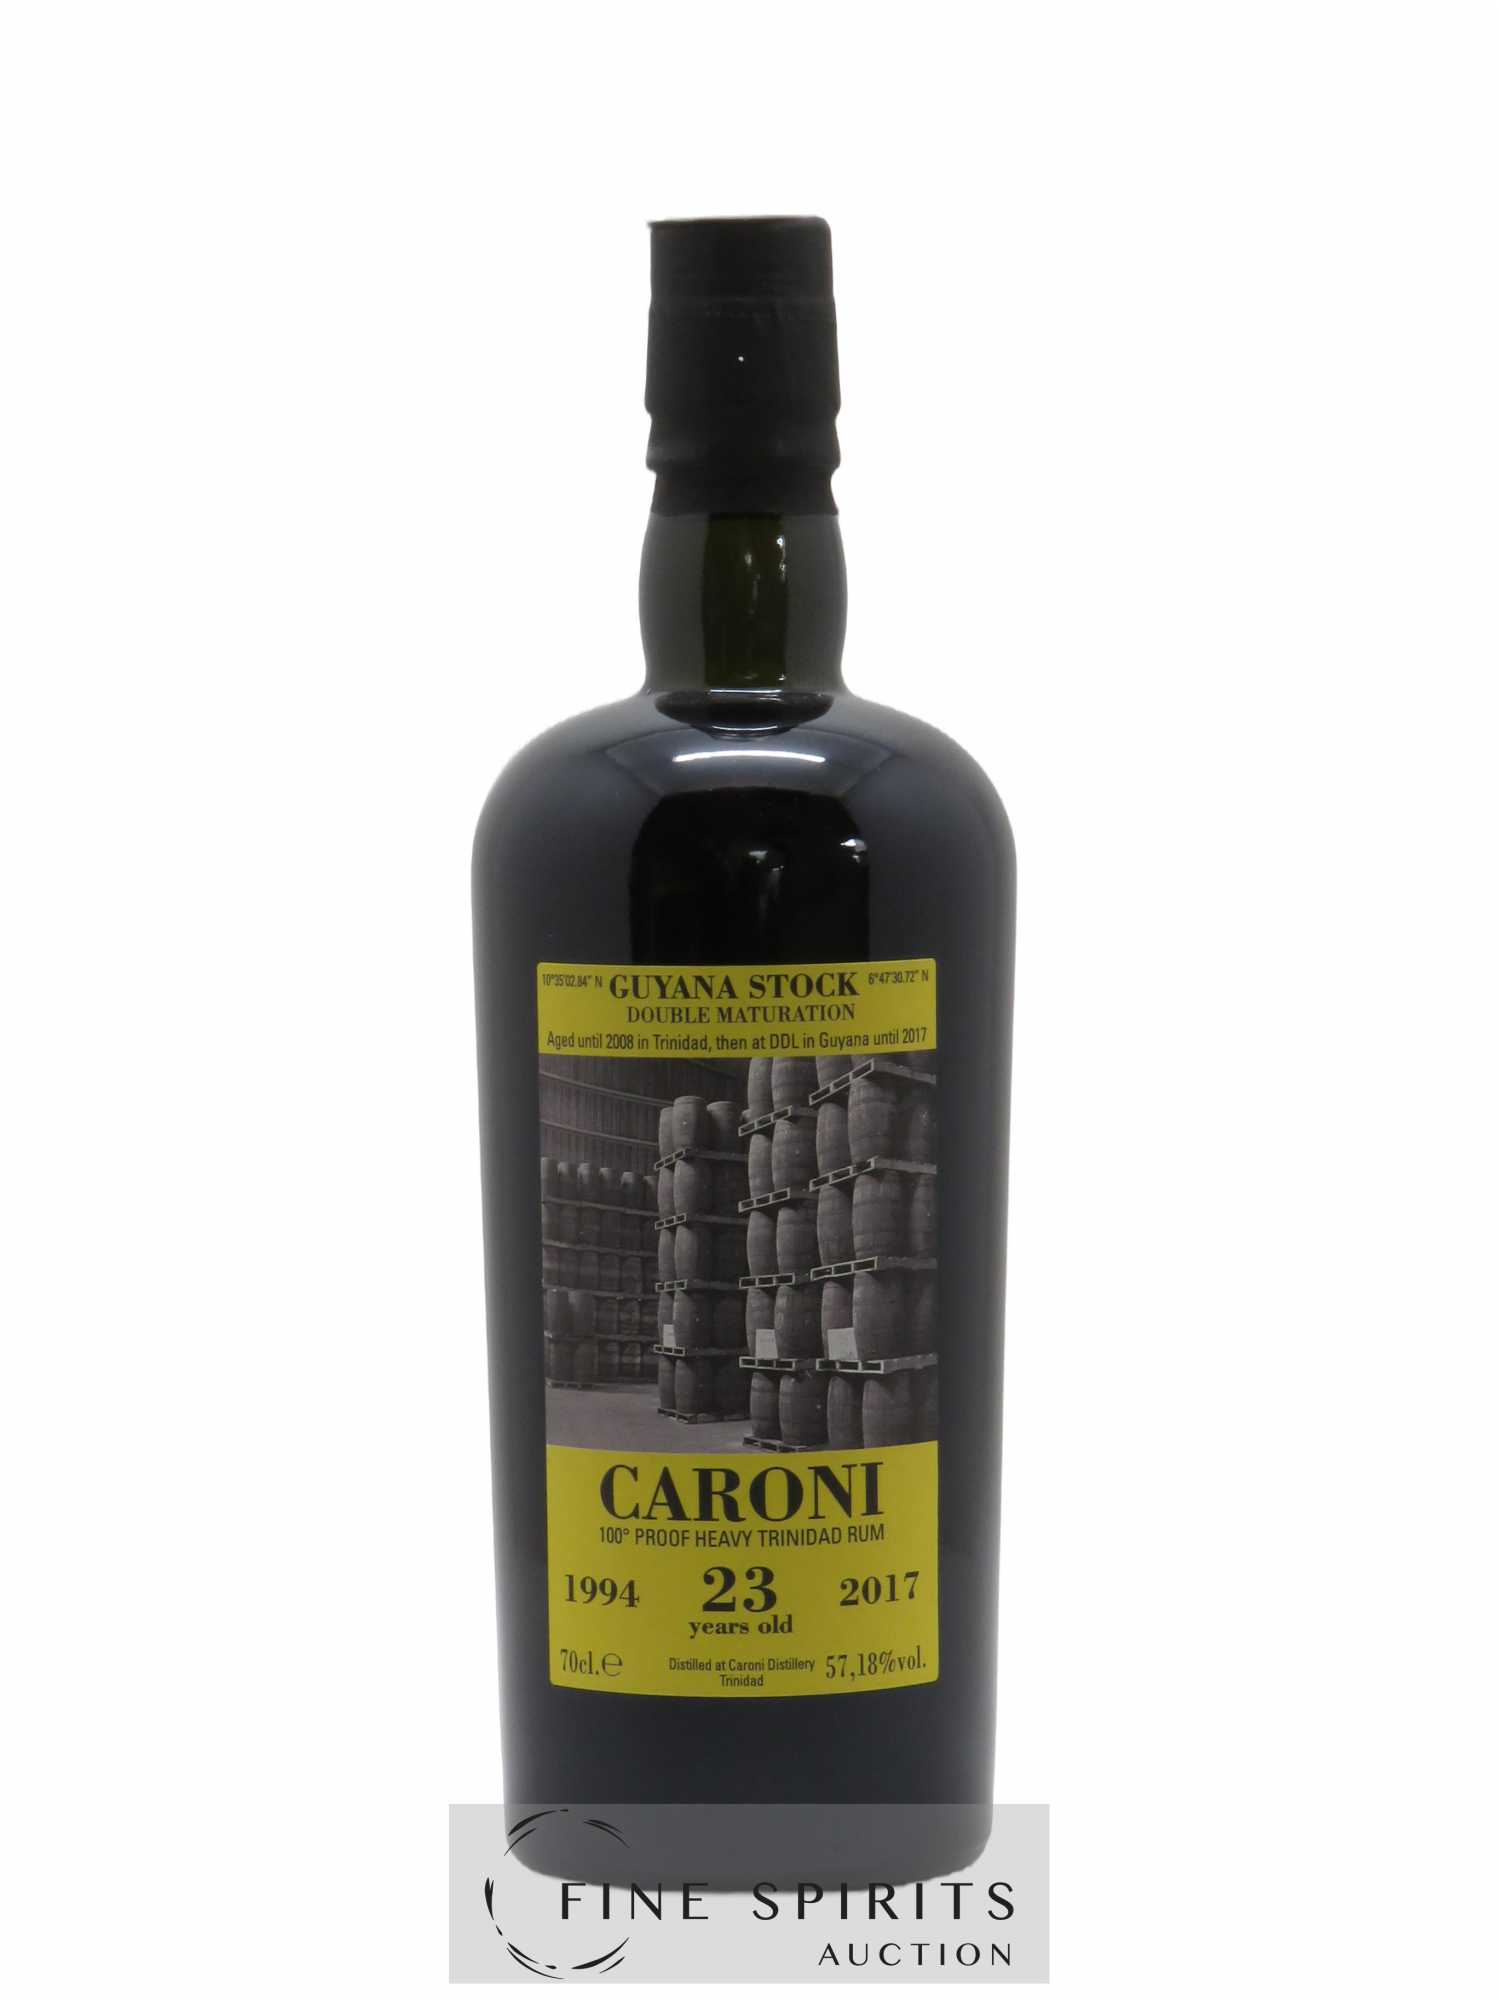 Caroni 23 years 1994 Velier 36th Release Double Maturation - bottled 2017 Guyana Stock